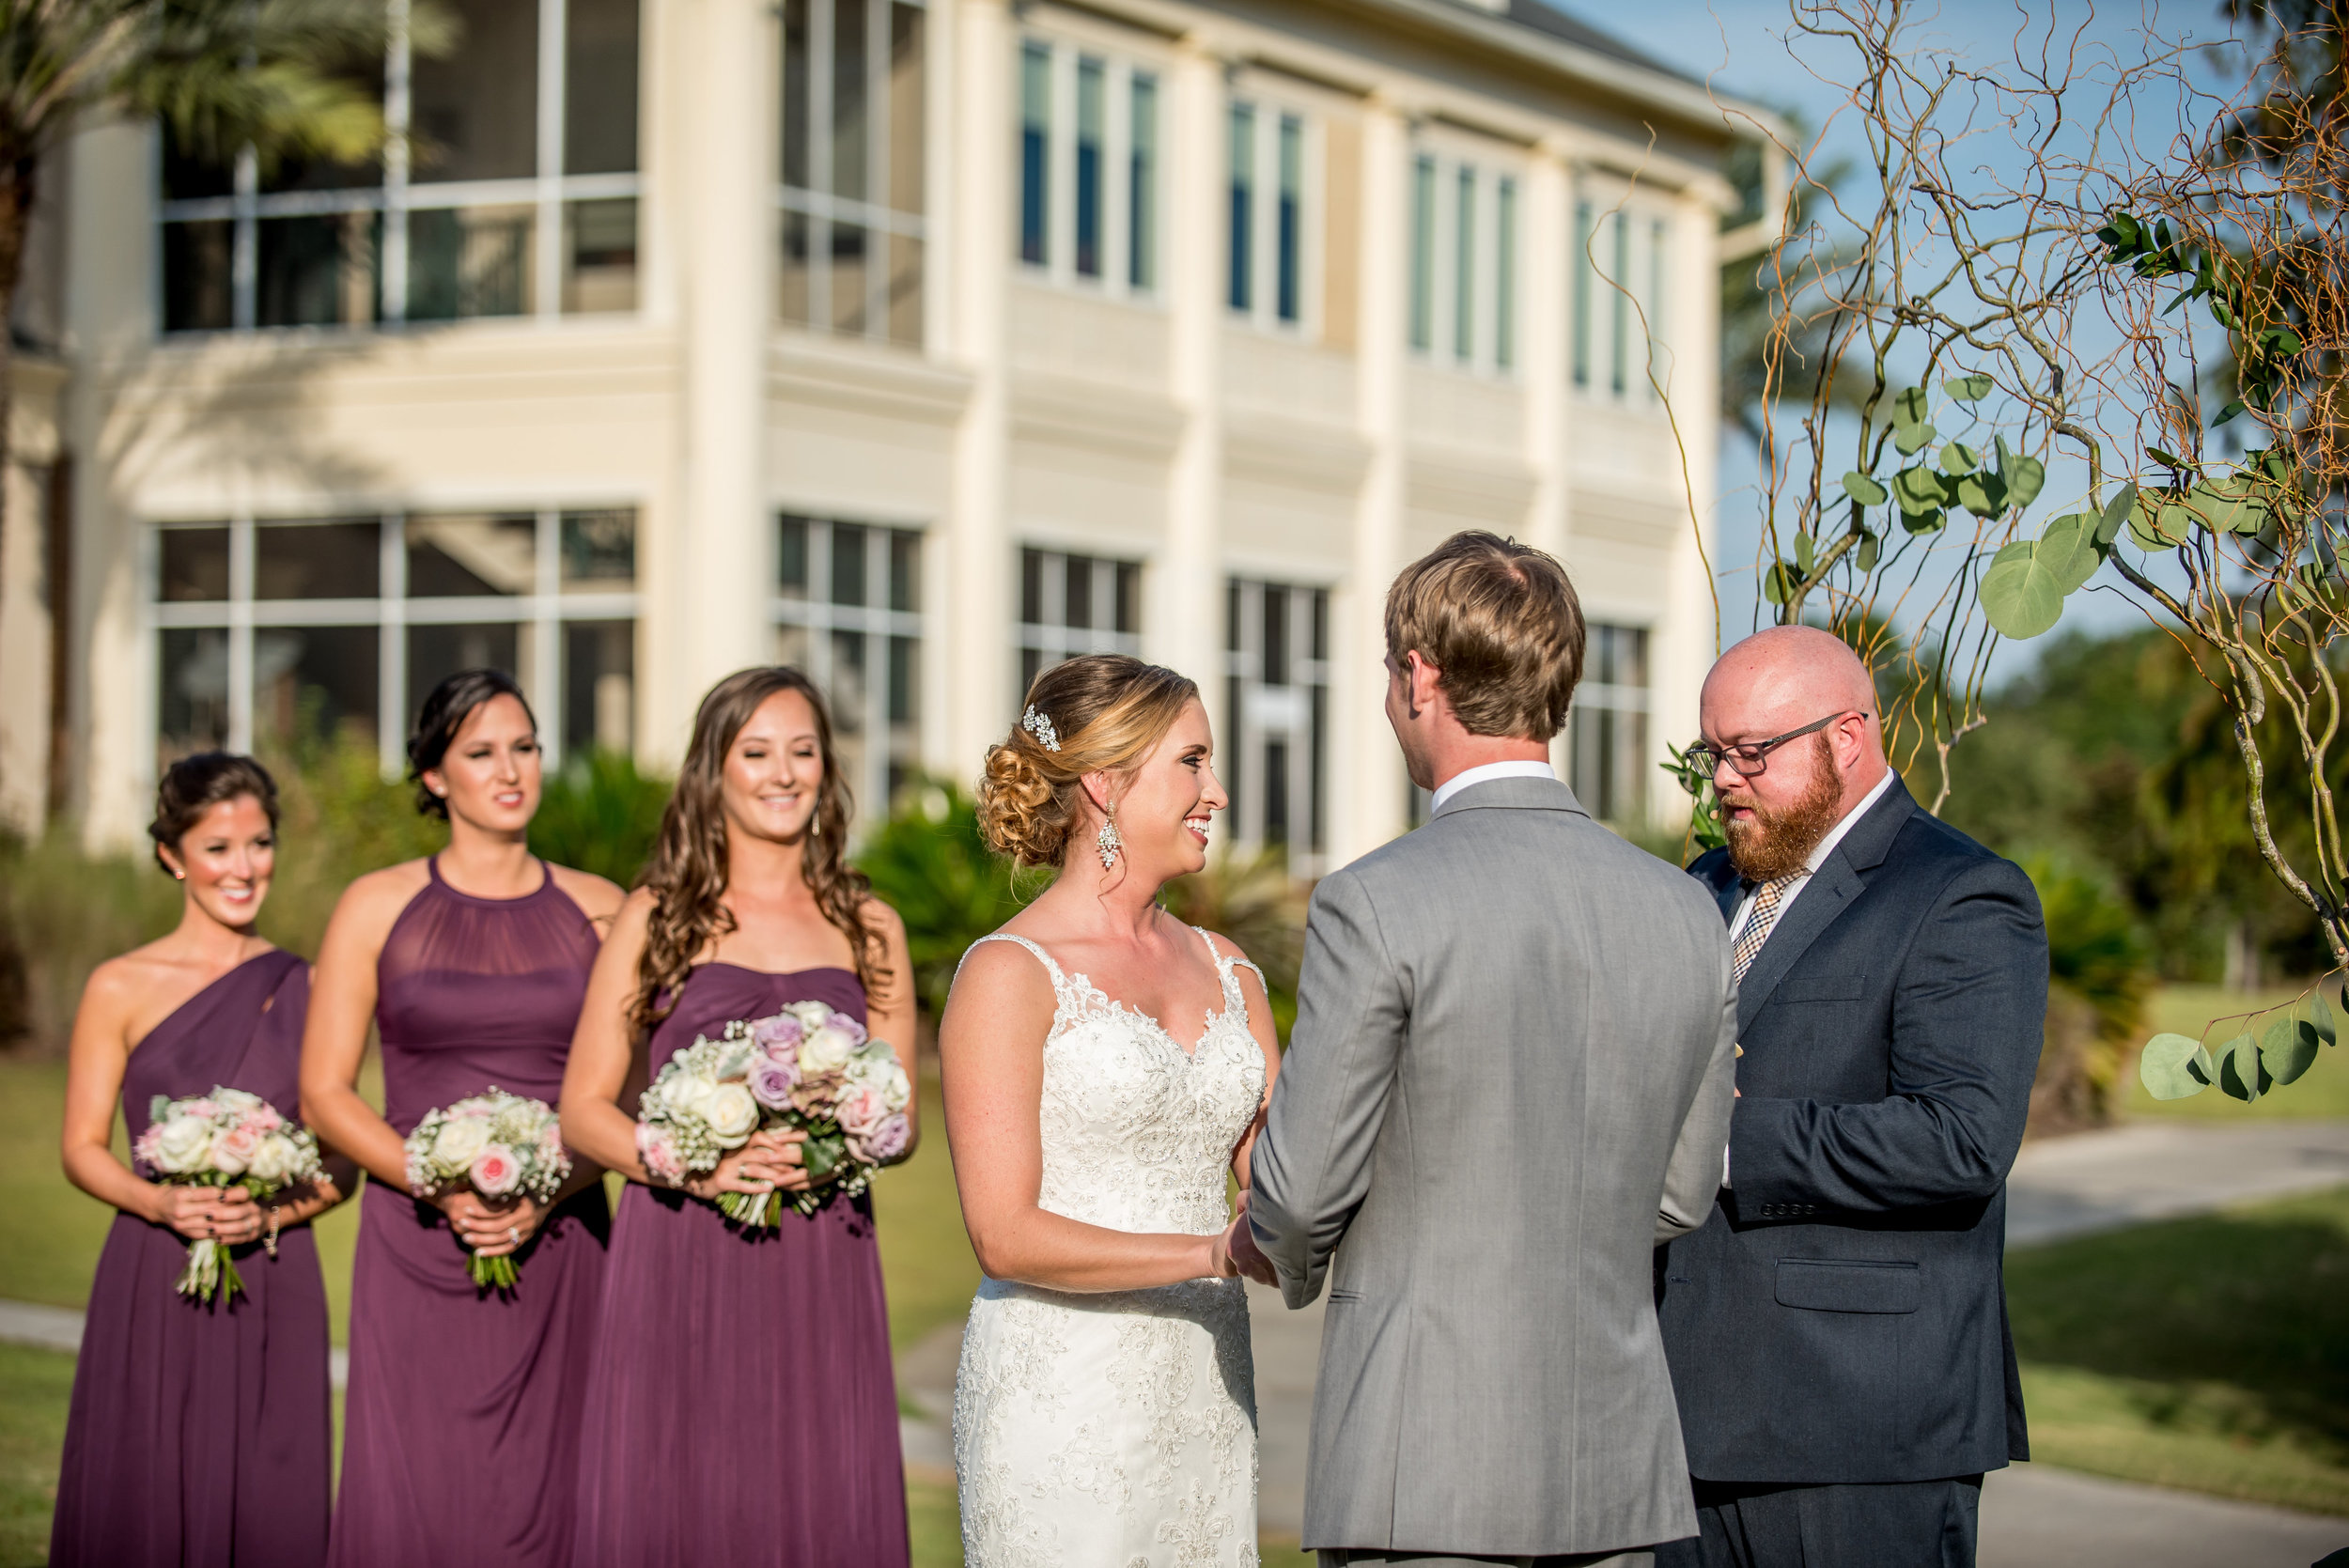 RiverTowne Country Club | Dandy Mae Photography